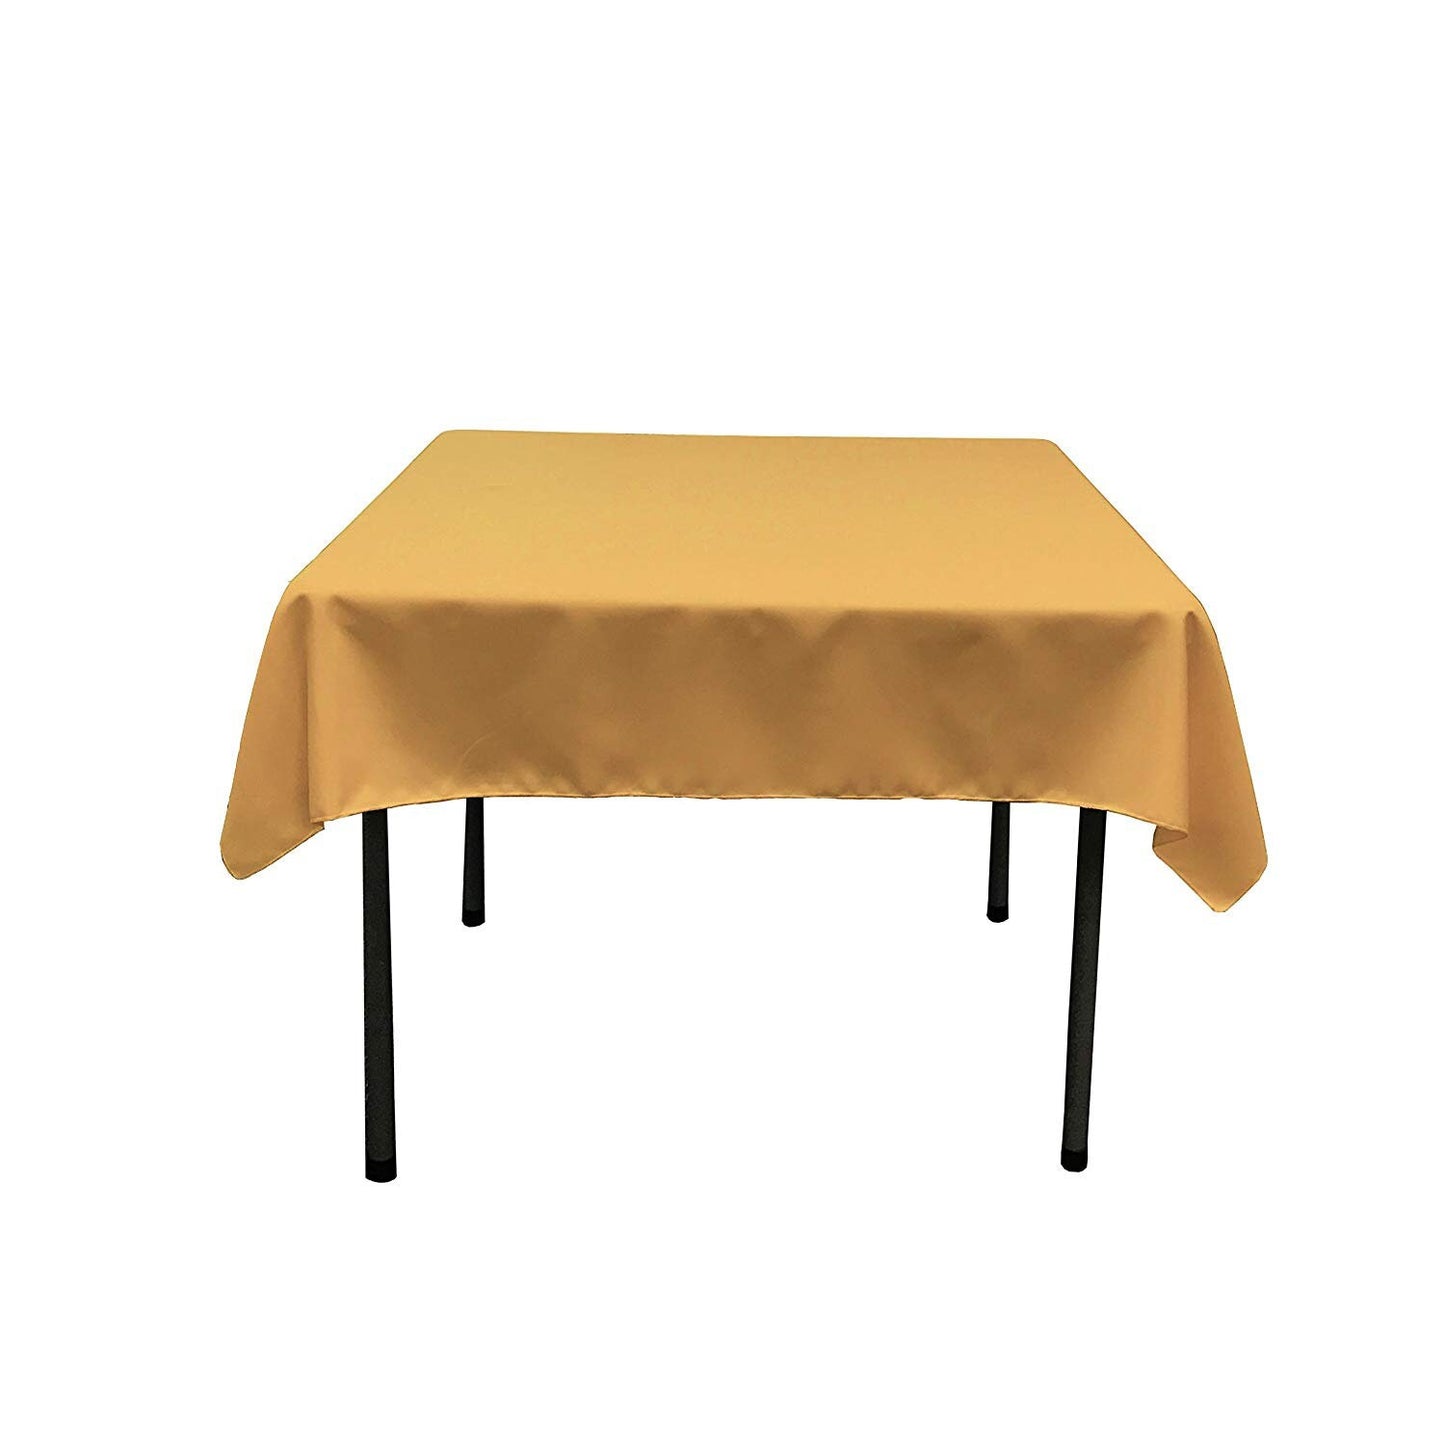 54 x 54-Inch Seamless Gold Rectangular Polyester Tablecloth for Wedding Party Decorations Square Table Cloth Cover